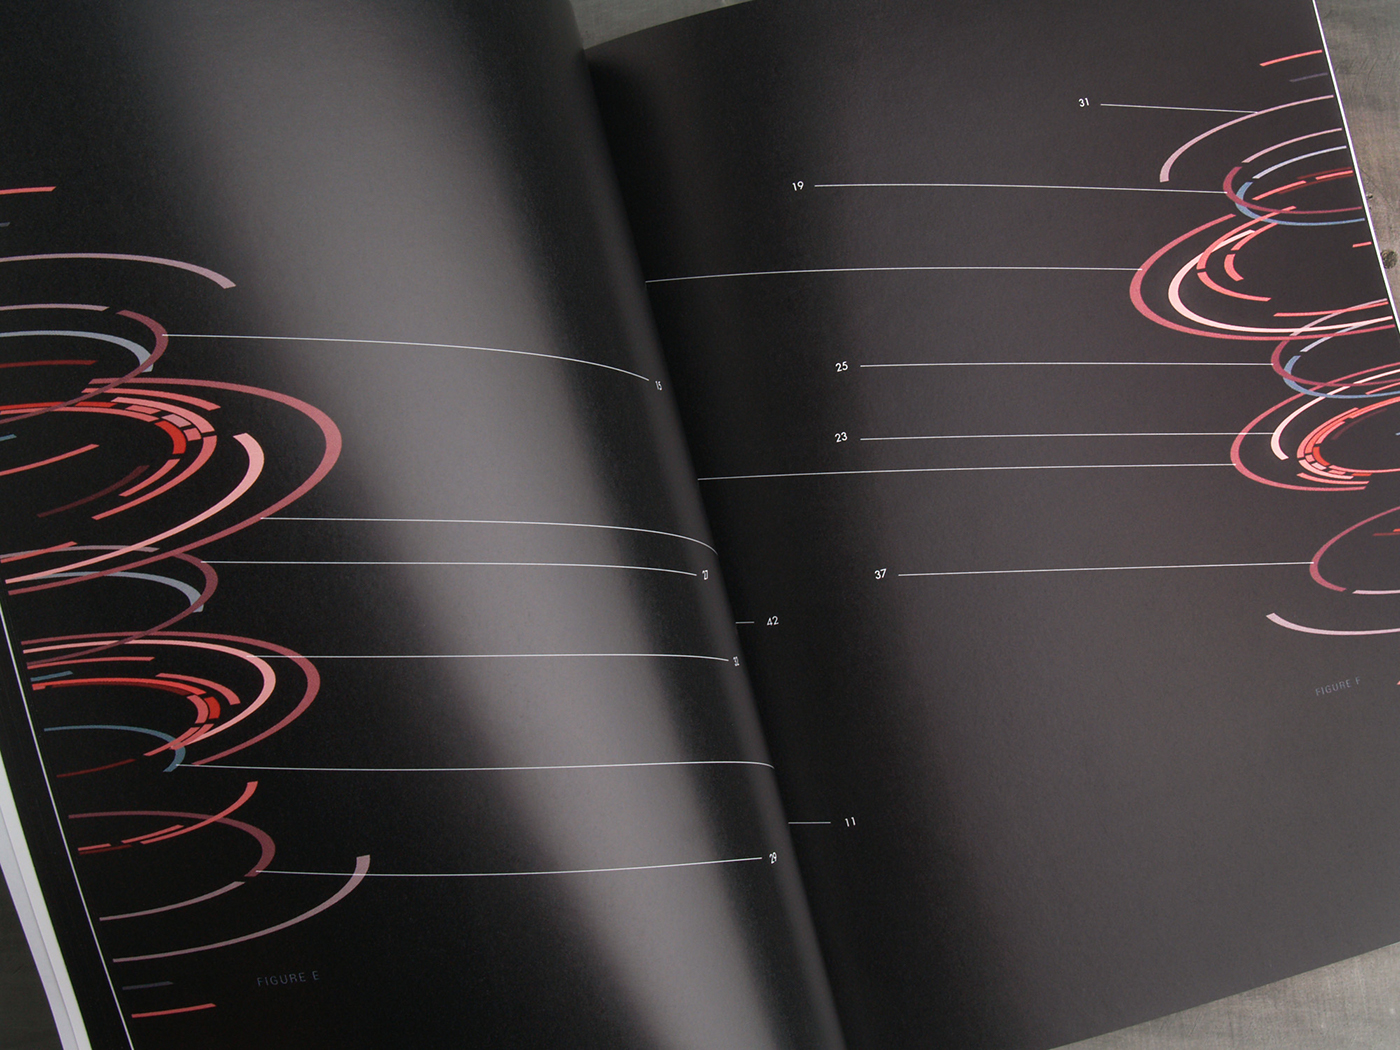 Black Holes Space  stellar supermassive black hole book infographic illustrations print type typography book contrast quasar event horizon info graphic